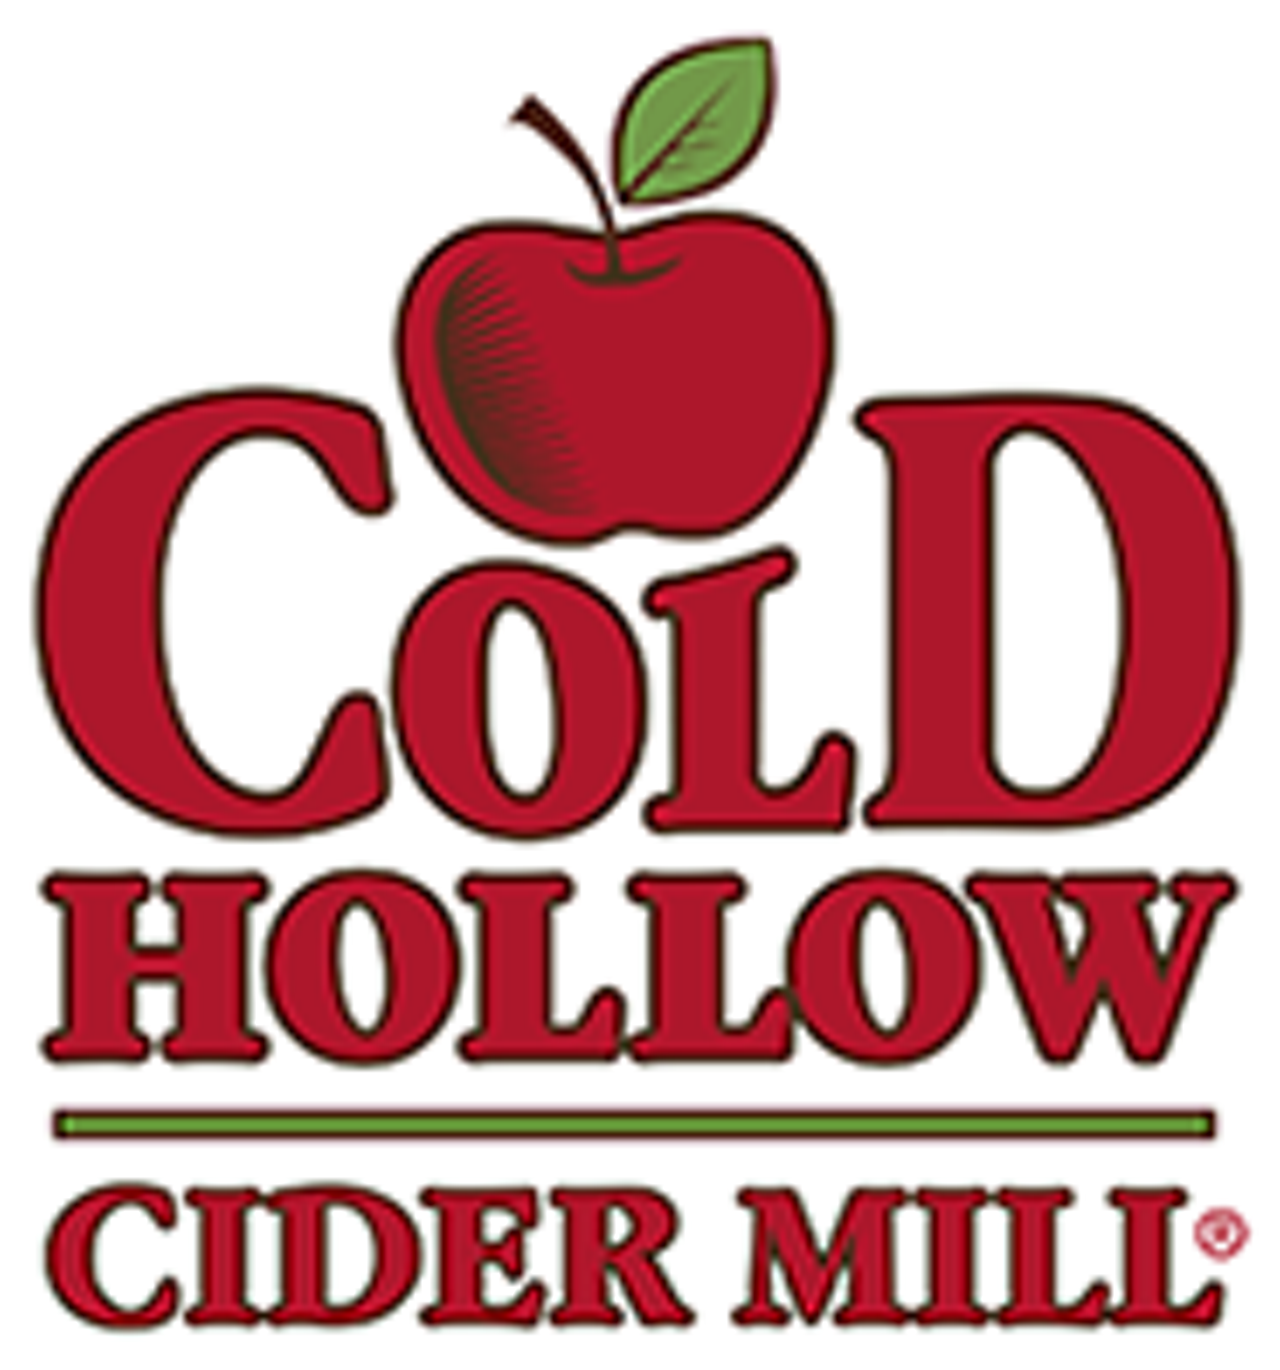 Cold Hollow Cider Mill Logo PNG